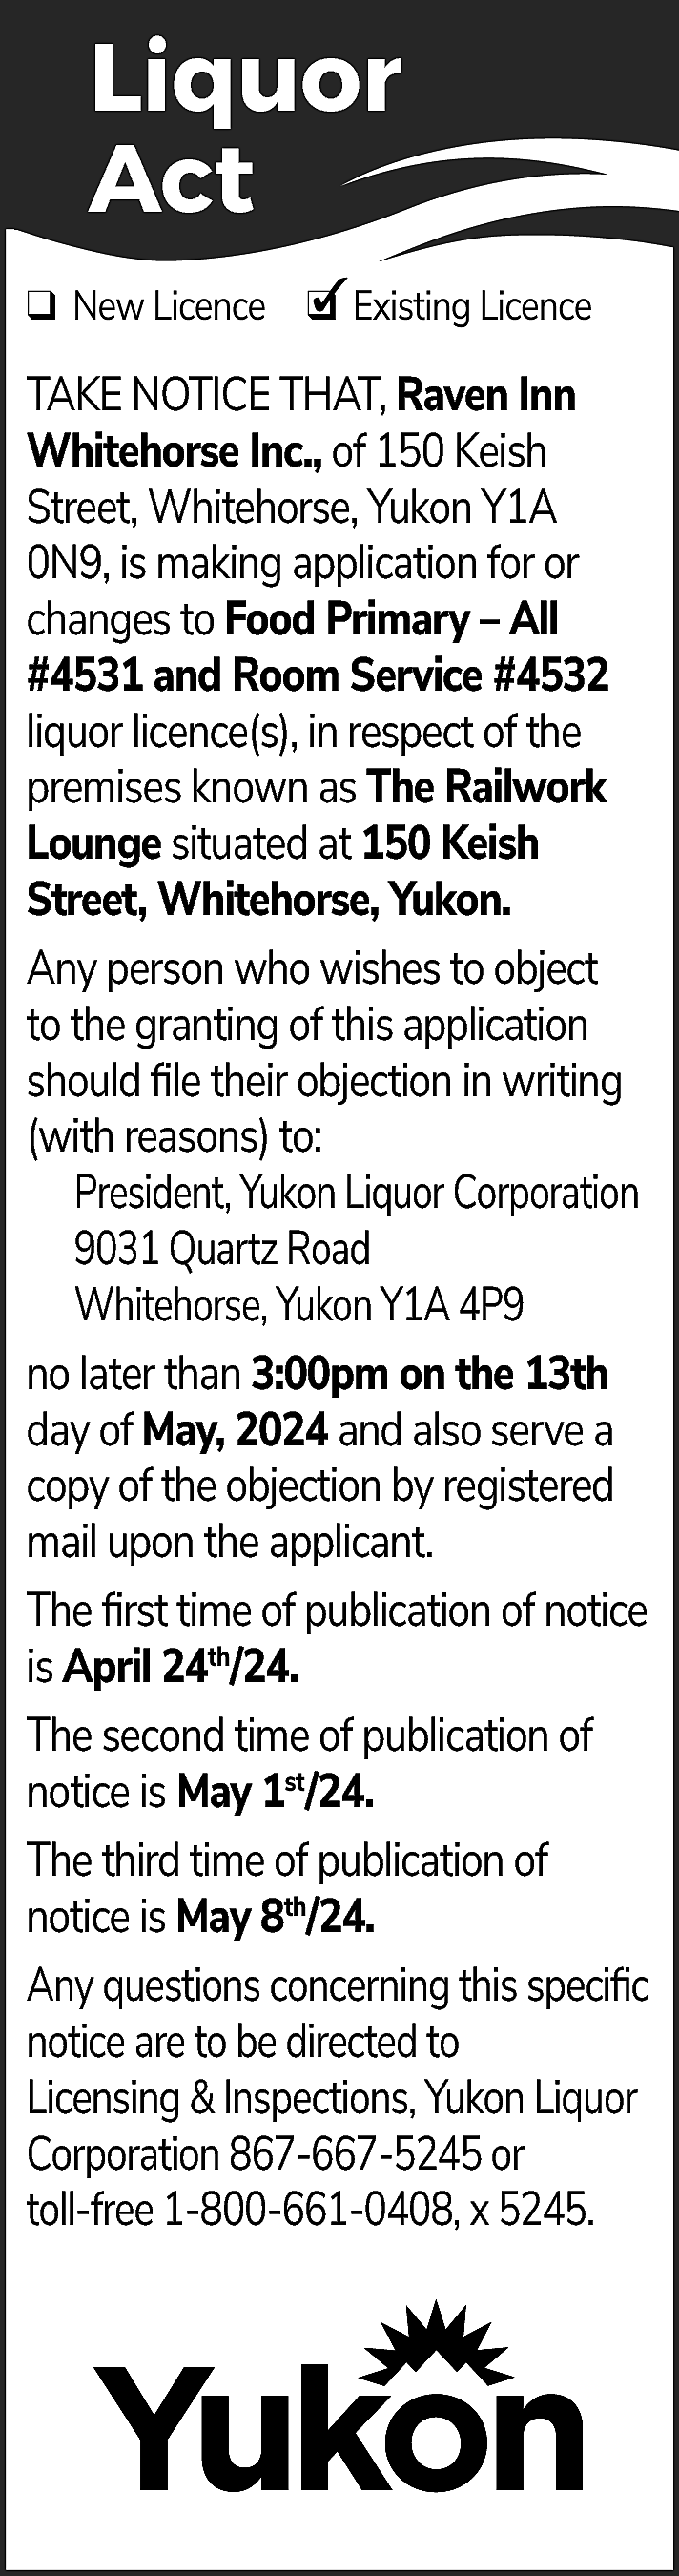 Liquor <br>Act <br>✓ Existing Licence  Liquor  Act  ✓ Existing Licence  ❑ New Licence ❑  TAKE NOTICE THAT, Raven Inn  Whitehorse Inc., of 150 Keish  Street, Whitehorse, Yukon Y1A  0N9, is making application for or  changes to Food Primary – All  #4531 and Room Service #4532  liquor licence(s), in respect of the  premises known as The Railwork  Lounge situated at 150 Keish  Street, Whitehorse, Yukon.  Any person who wishes to object  to the granting of this application  should file their objection in writing  (with reasons) to:  President, Yukon Liquor Corporation  9031 Quartz Road  Whitehorse, Yukon Y1A 4P9  no later than 3:00pm on the 13th  day of May, 2024 and also serve a  copy of the objection by registered  mail upon the applicant.  The first time of publication of notice  is April 24th/24.  The second time of publication of  notice is May 1st/24.  The third time of publication of  notice is May 8th/24.  Any questions concerning this specific  notice are to be directed to  Licensing & Inspections, Yukon Liquor  Corporation 867-667-5245 or  toll-free 1-800-661-0408, x 5245.    